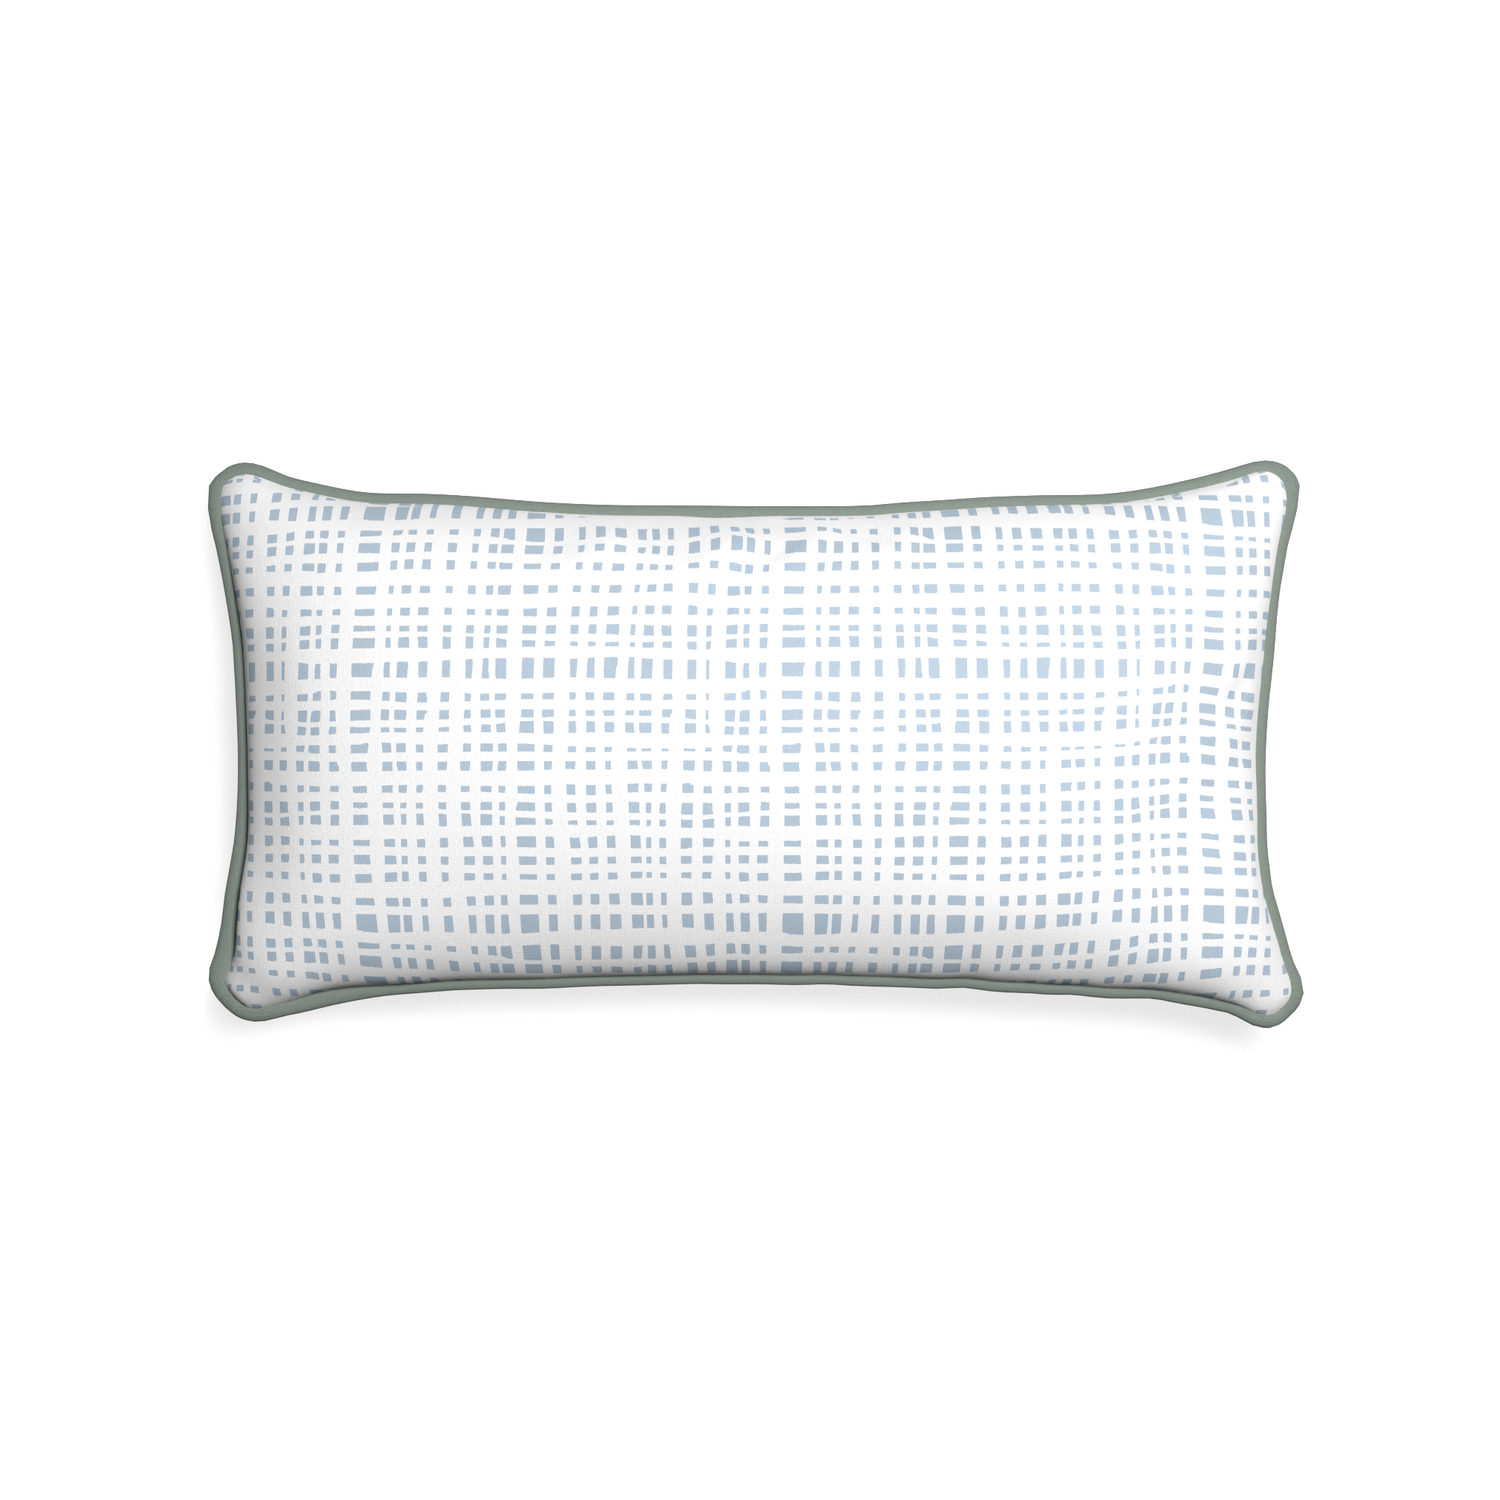 Midi-lumbar ginger sky custom plaid sky bluepillow with sage piping on white background